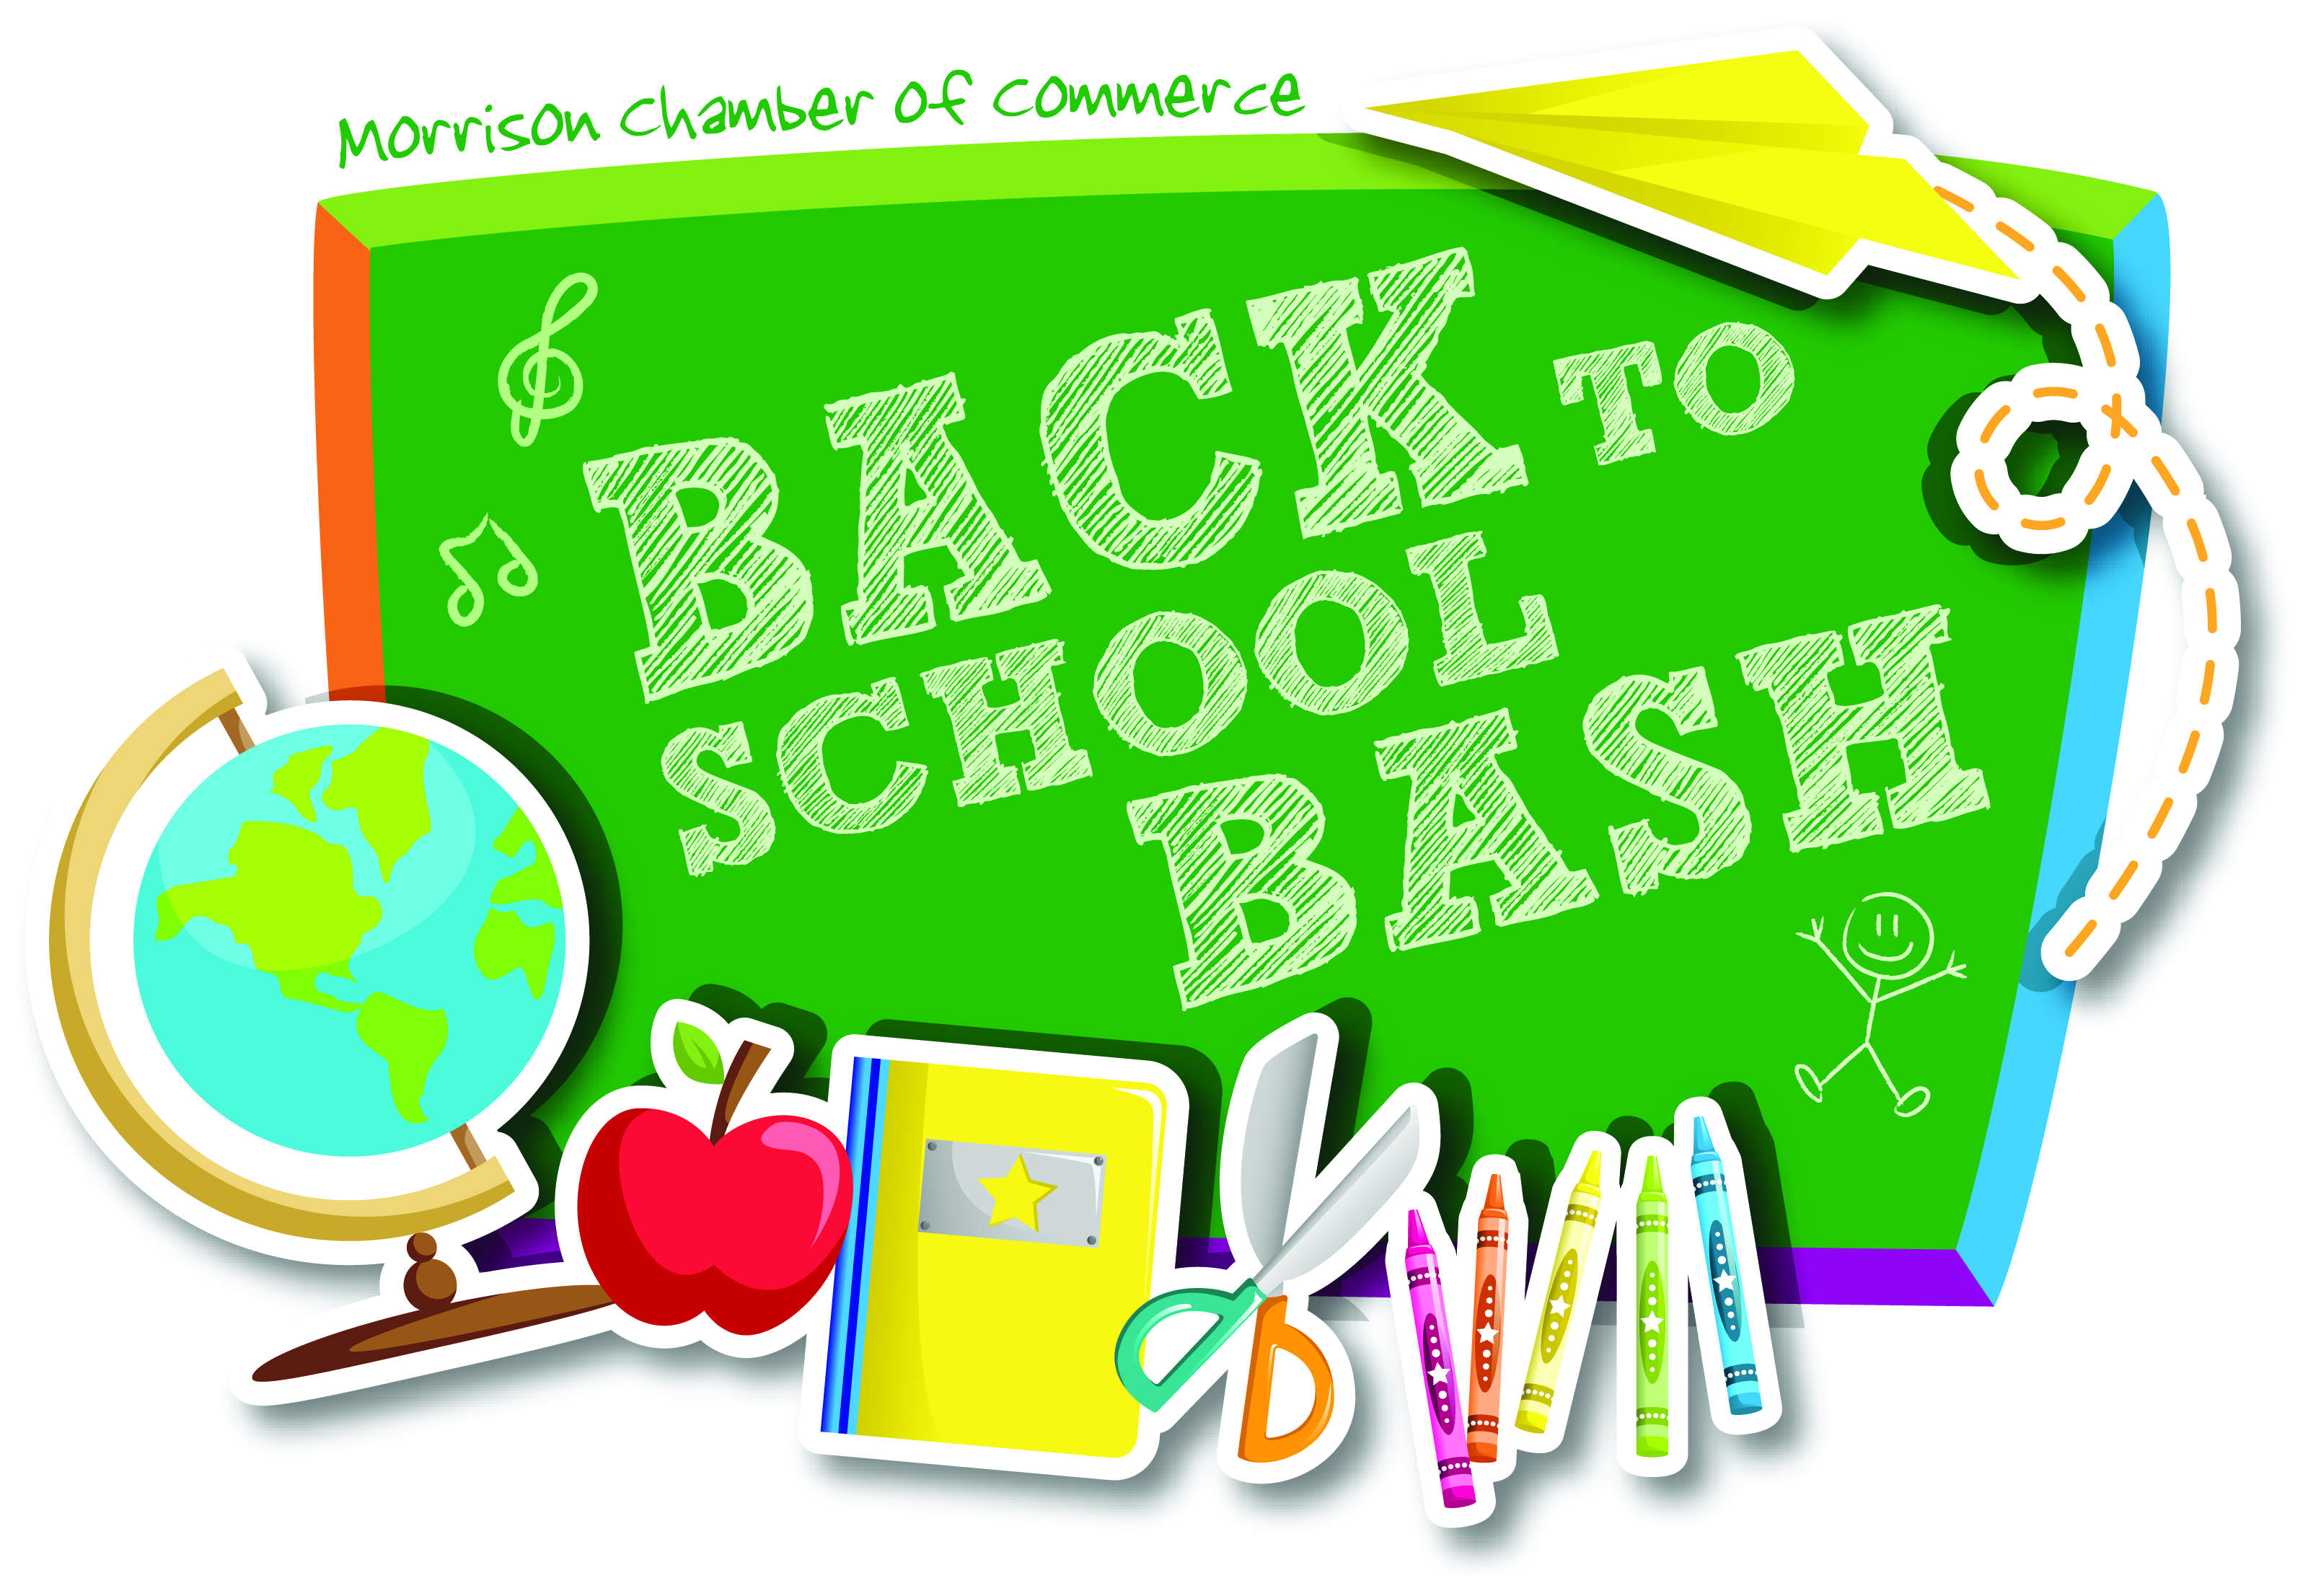 back to school bash clipart - photo #41